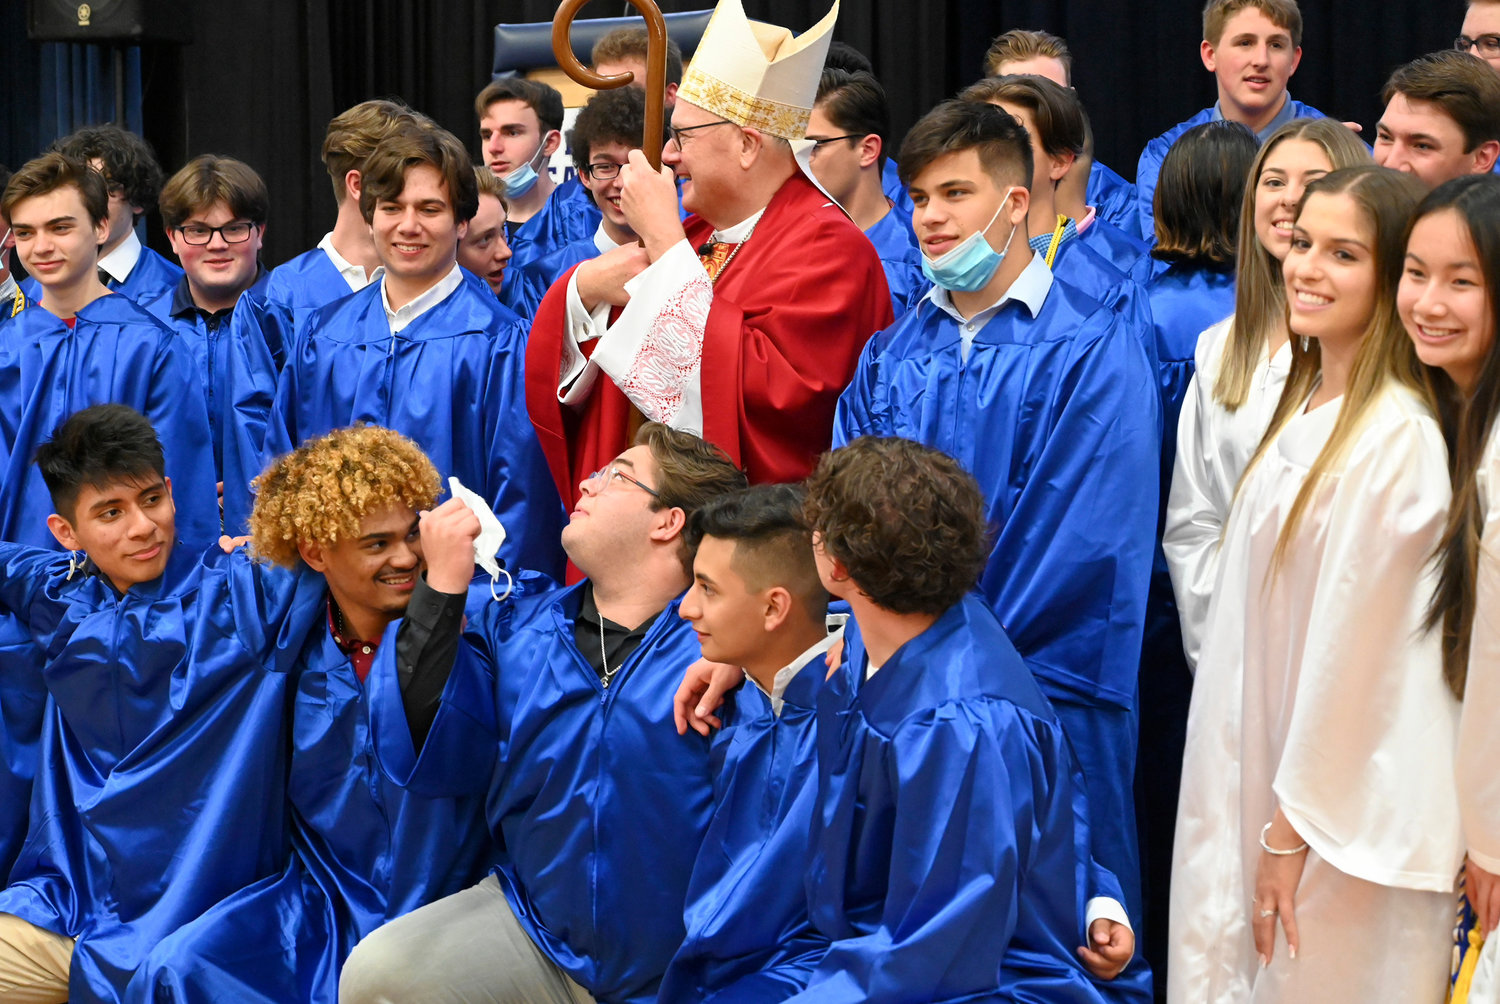 Cardinal Dolan stands in a photo with the graduating seniors of John S. Burke High School in Goshen following the Baccalaureate Mass June 3.